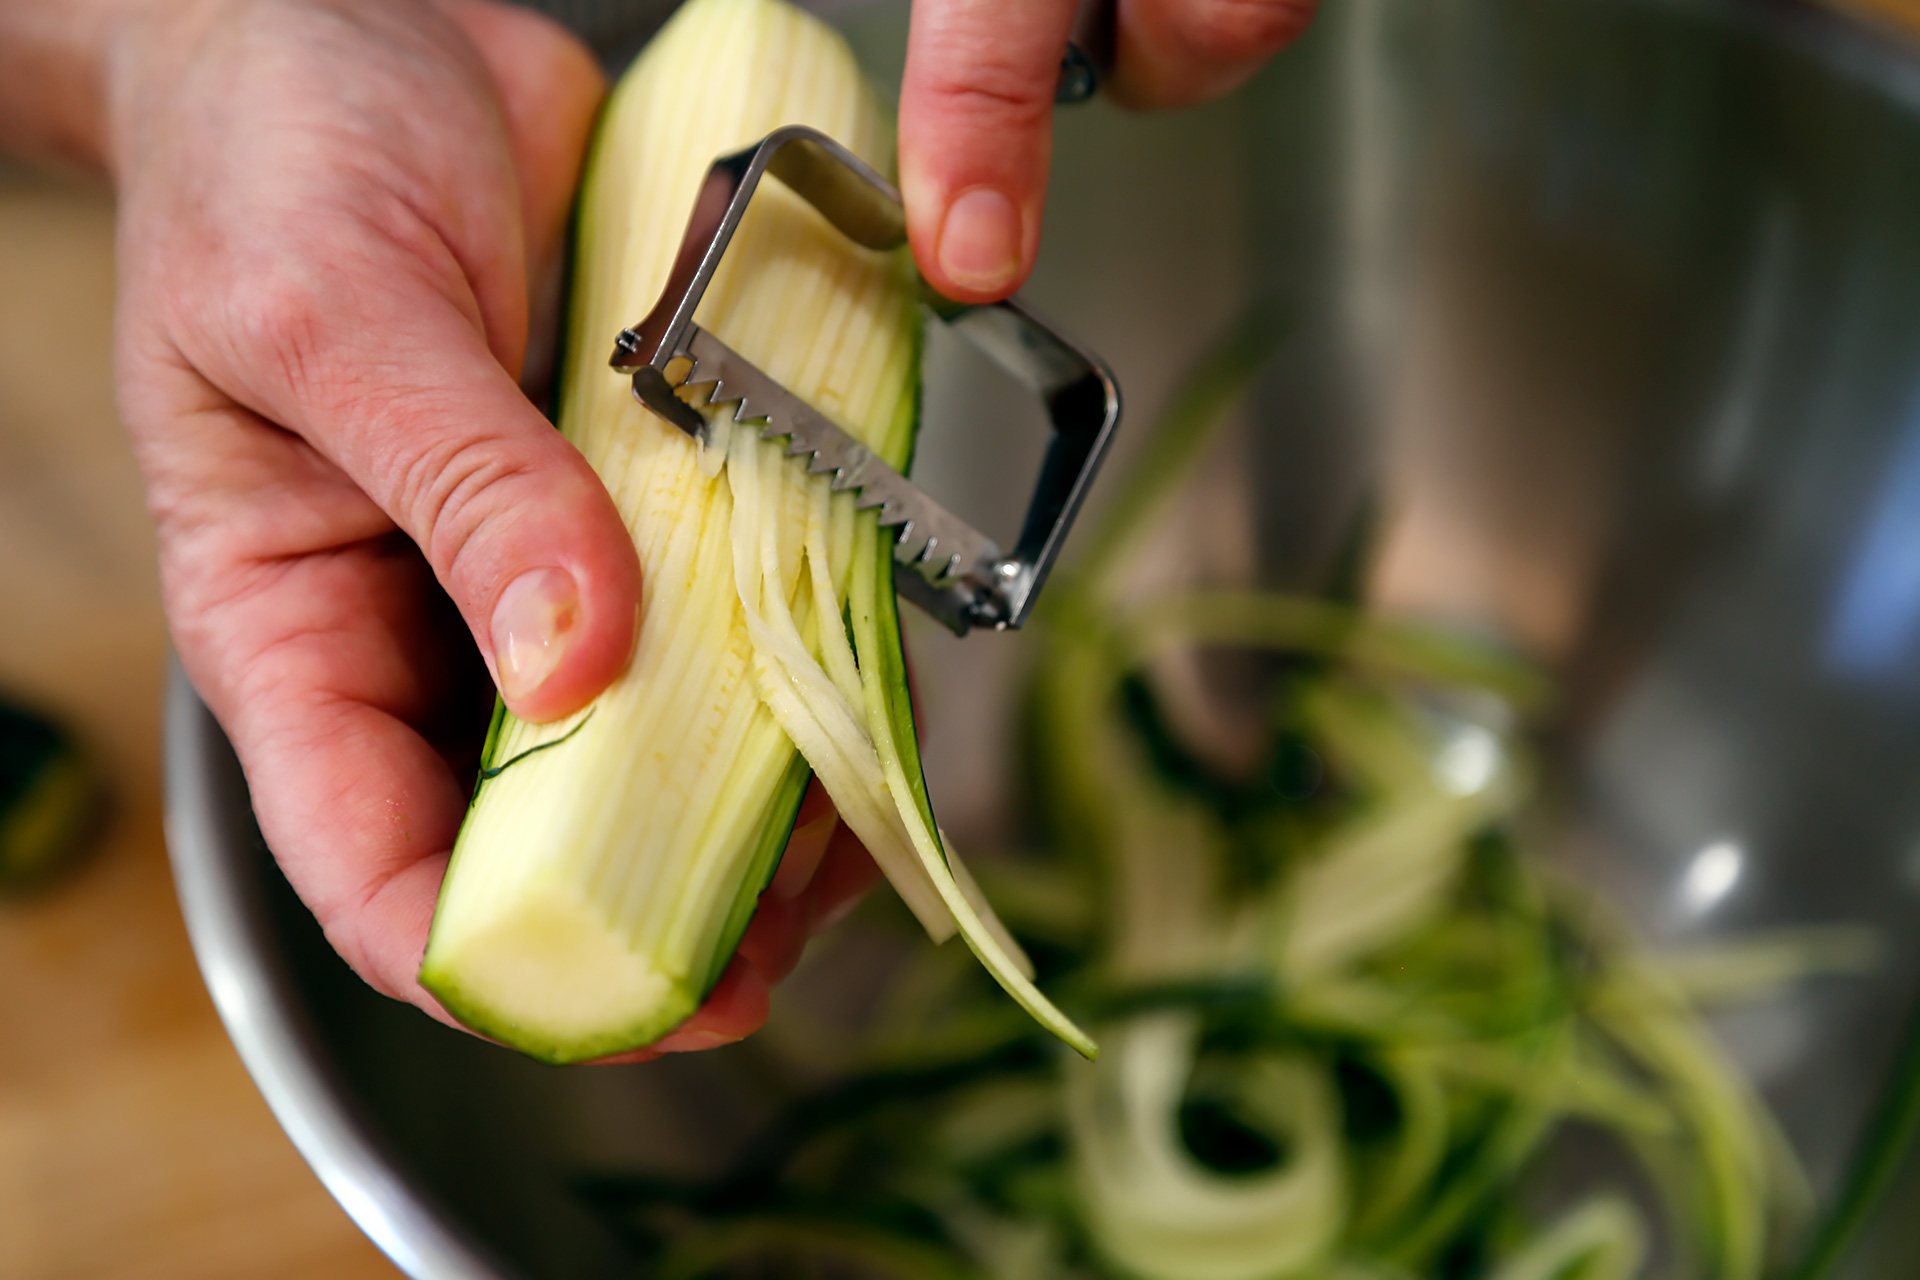 Use a spiral vegetable cutter to cut the zucchini into “noodles.”